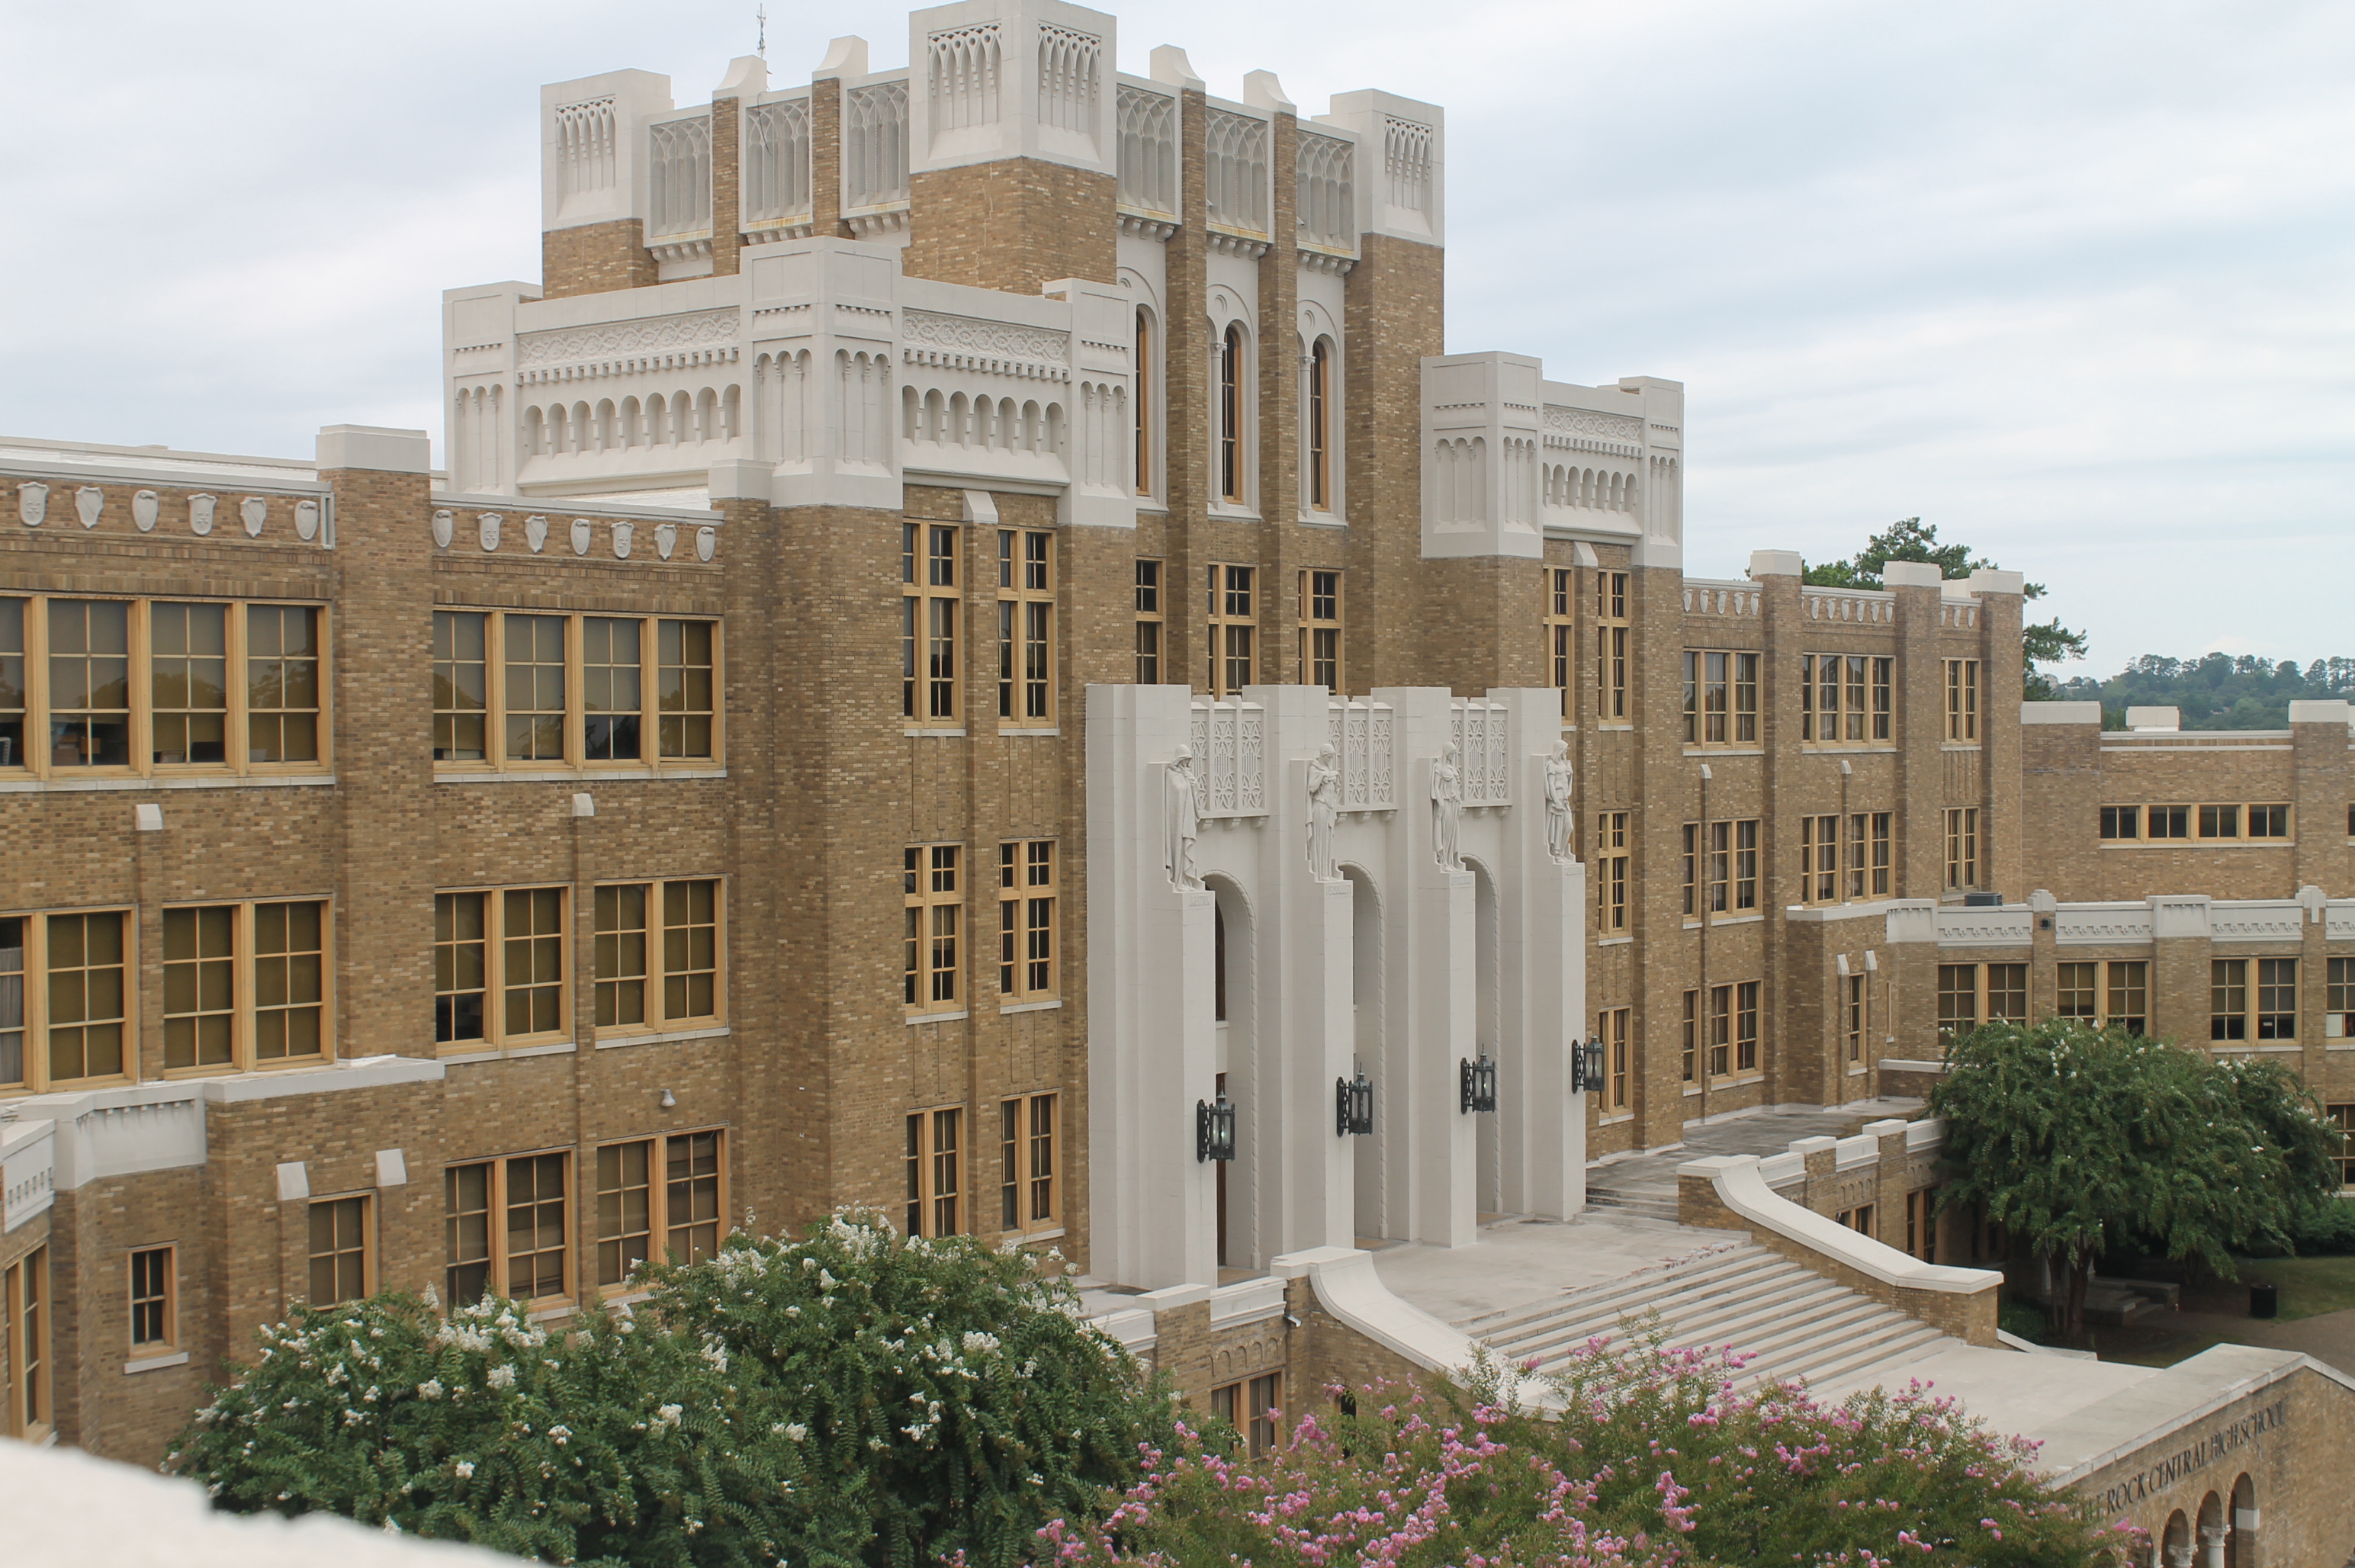 Front facade of Little Rock Central High School as viewed from the south wing.